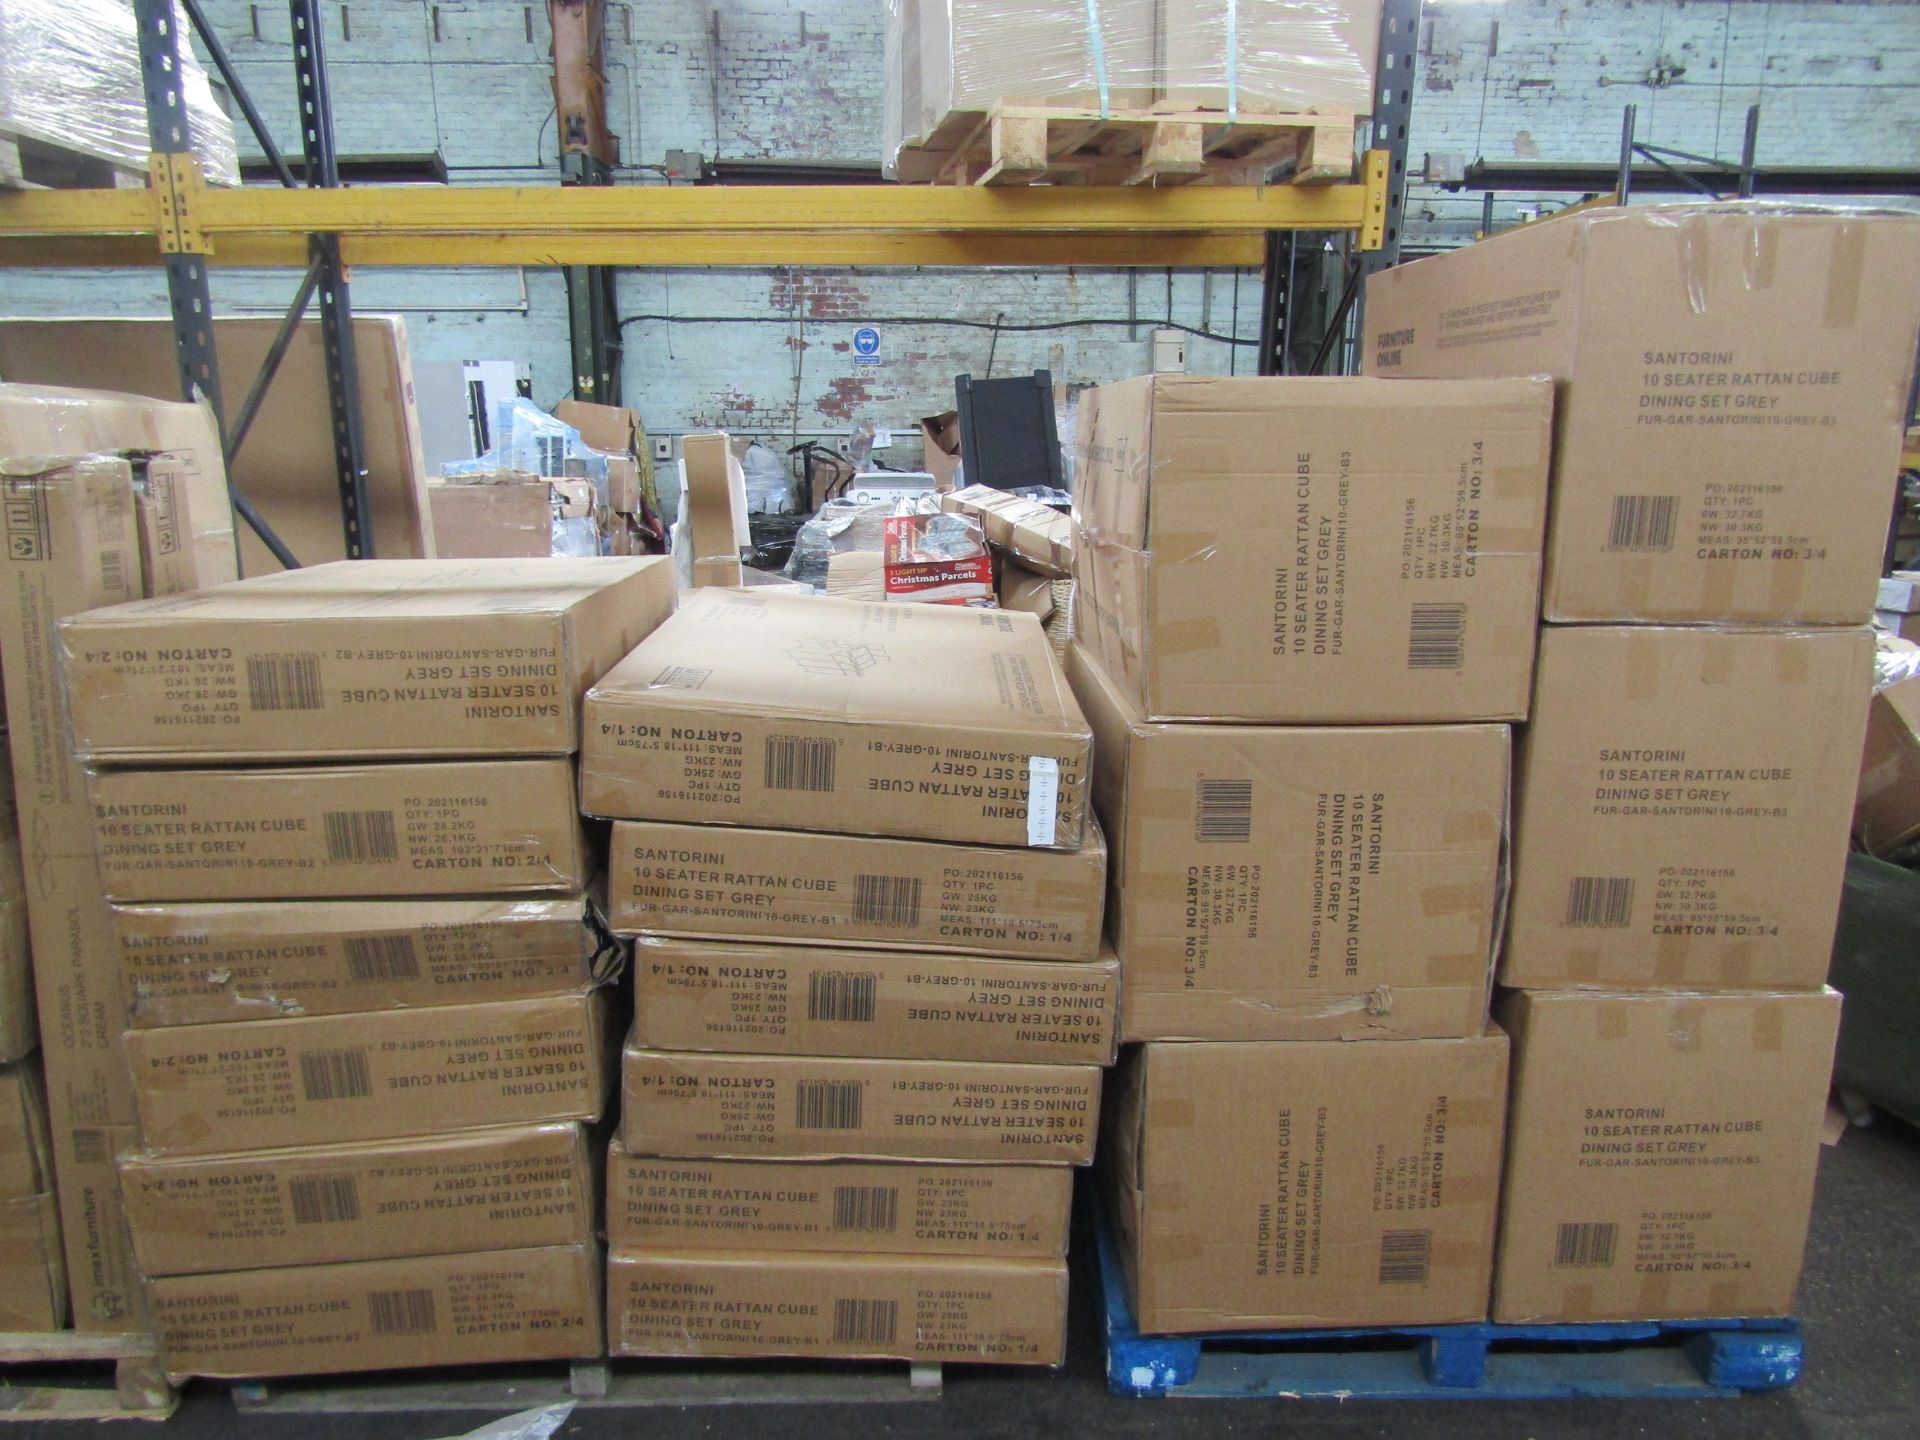 3 x boxes of˜Furniture Online Ex-Retail Customer Returns Mixed Lot - Total RRP est. 1124.25This